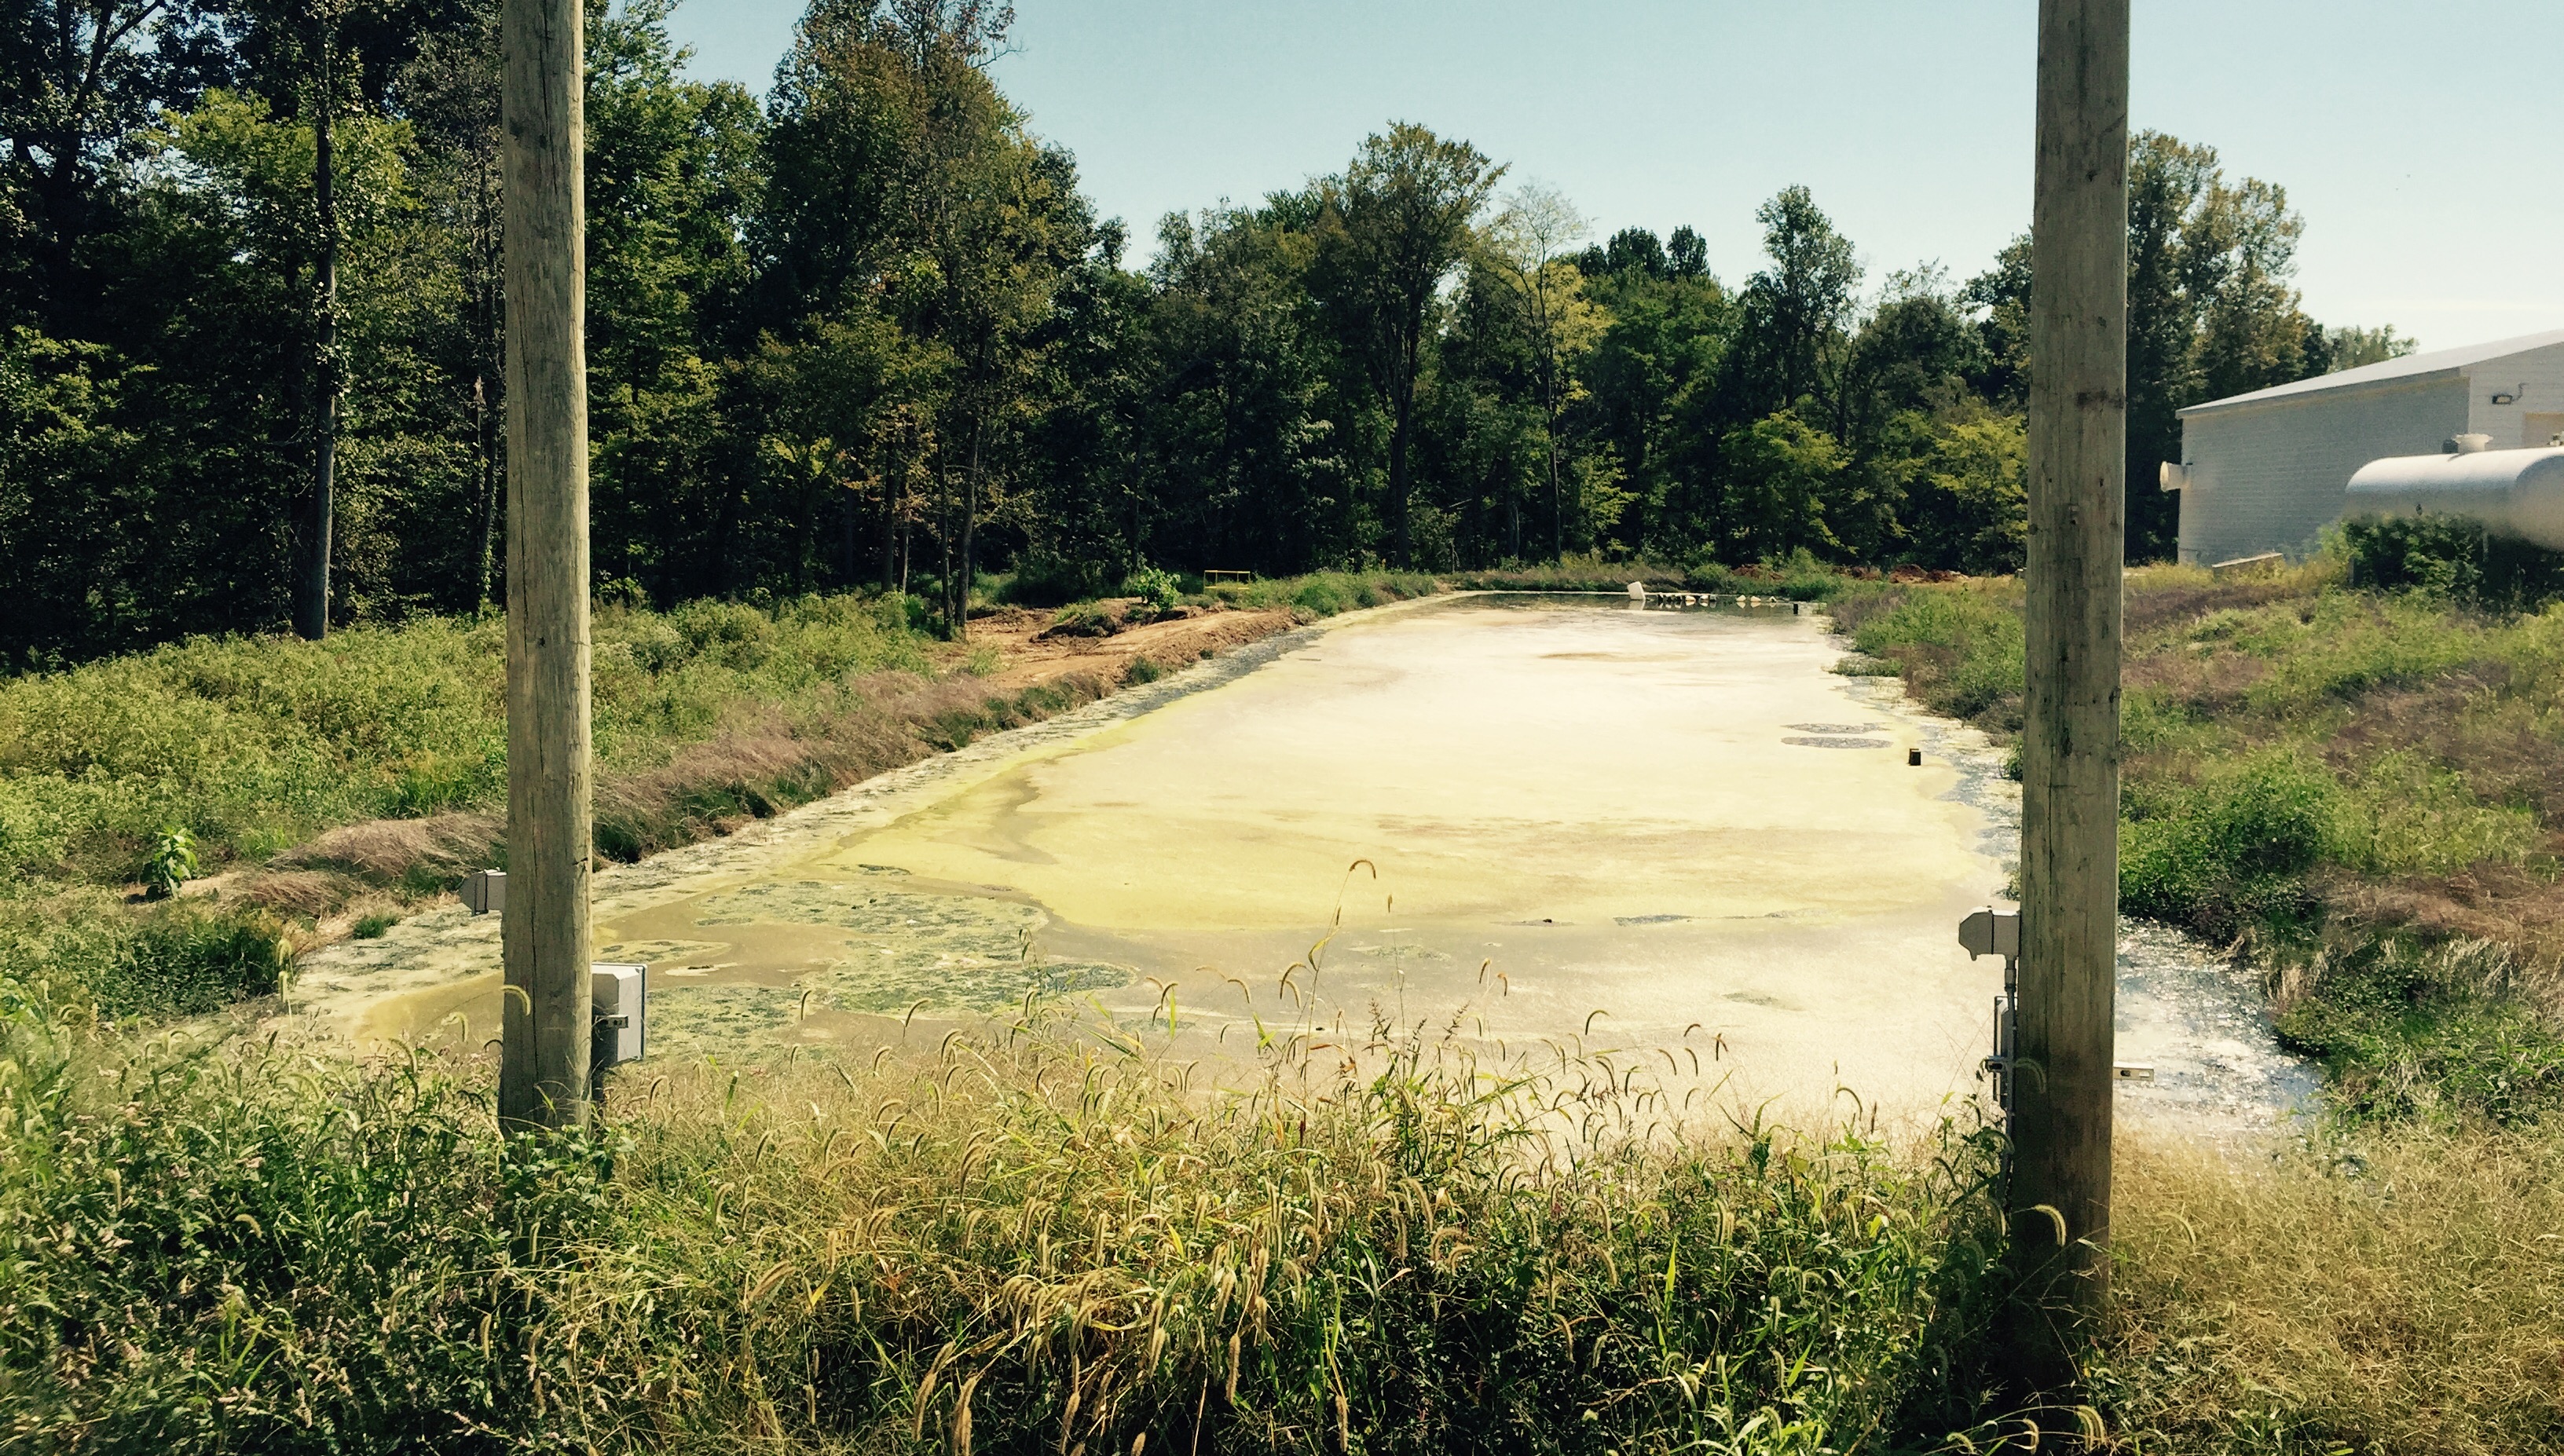 "Gray water pond" or "pig waste lagoon"? The answer may determine what rules apply.